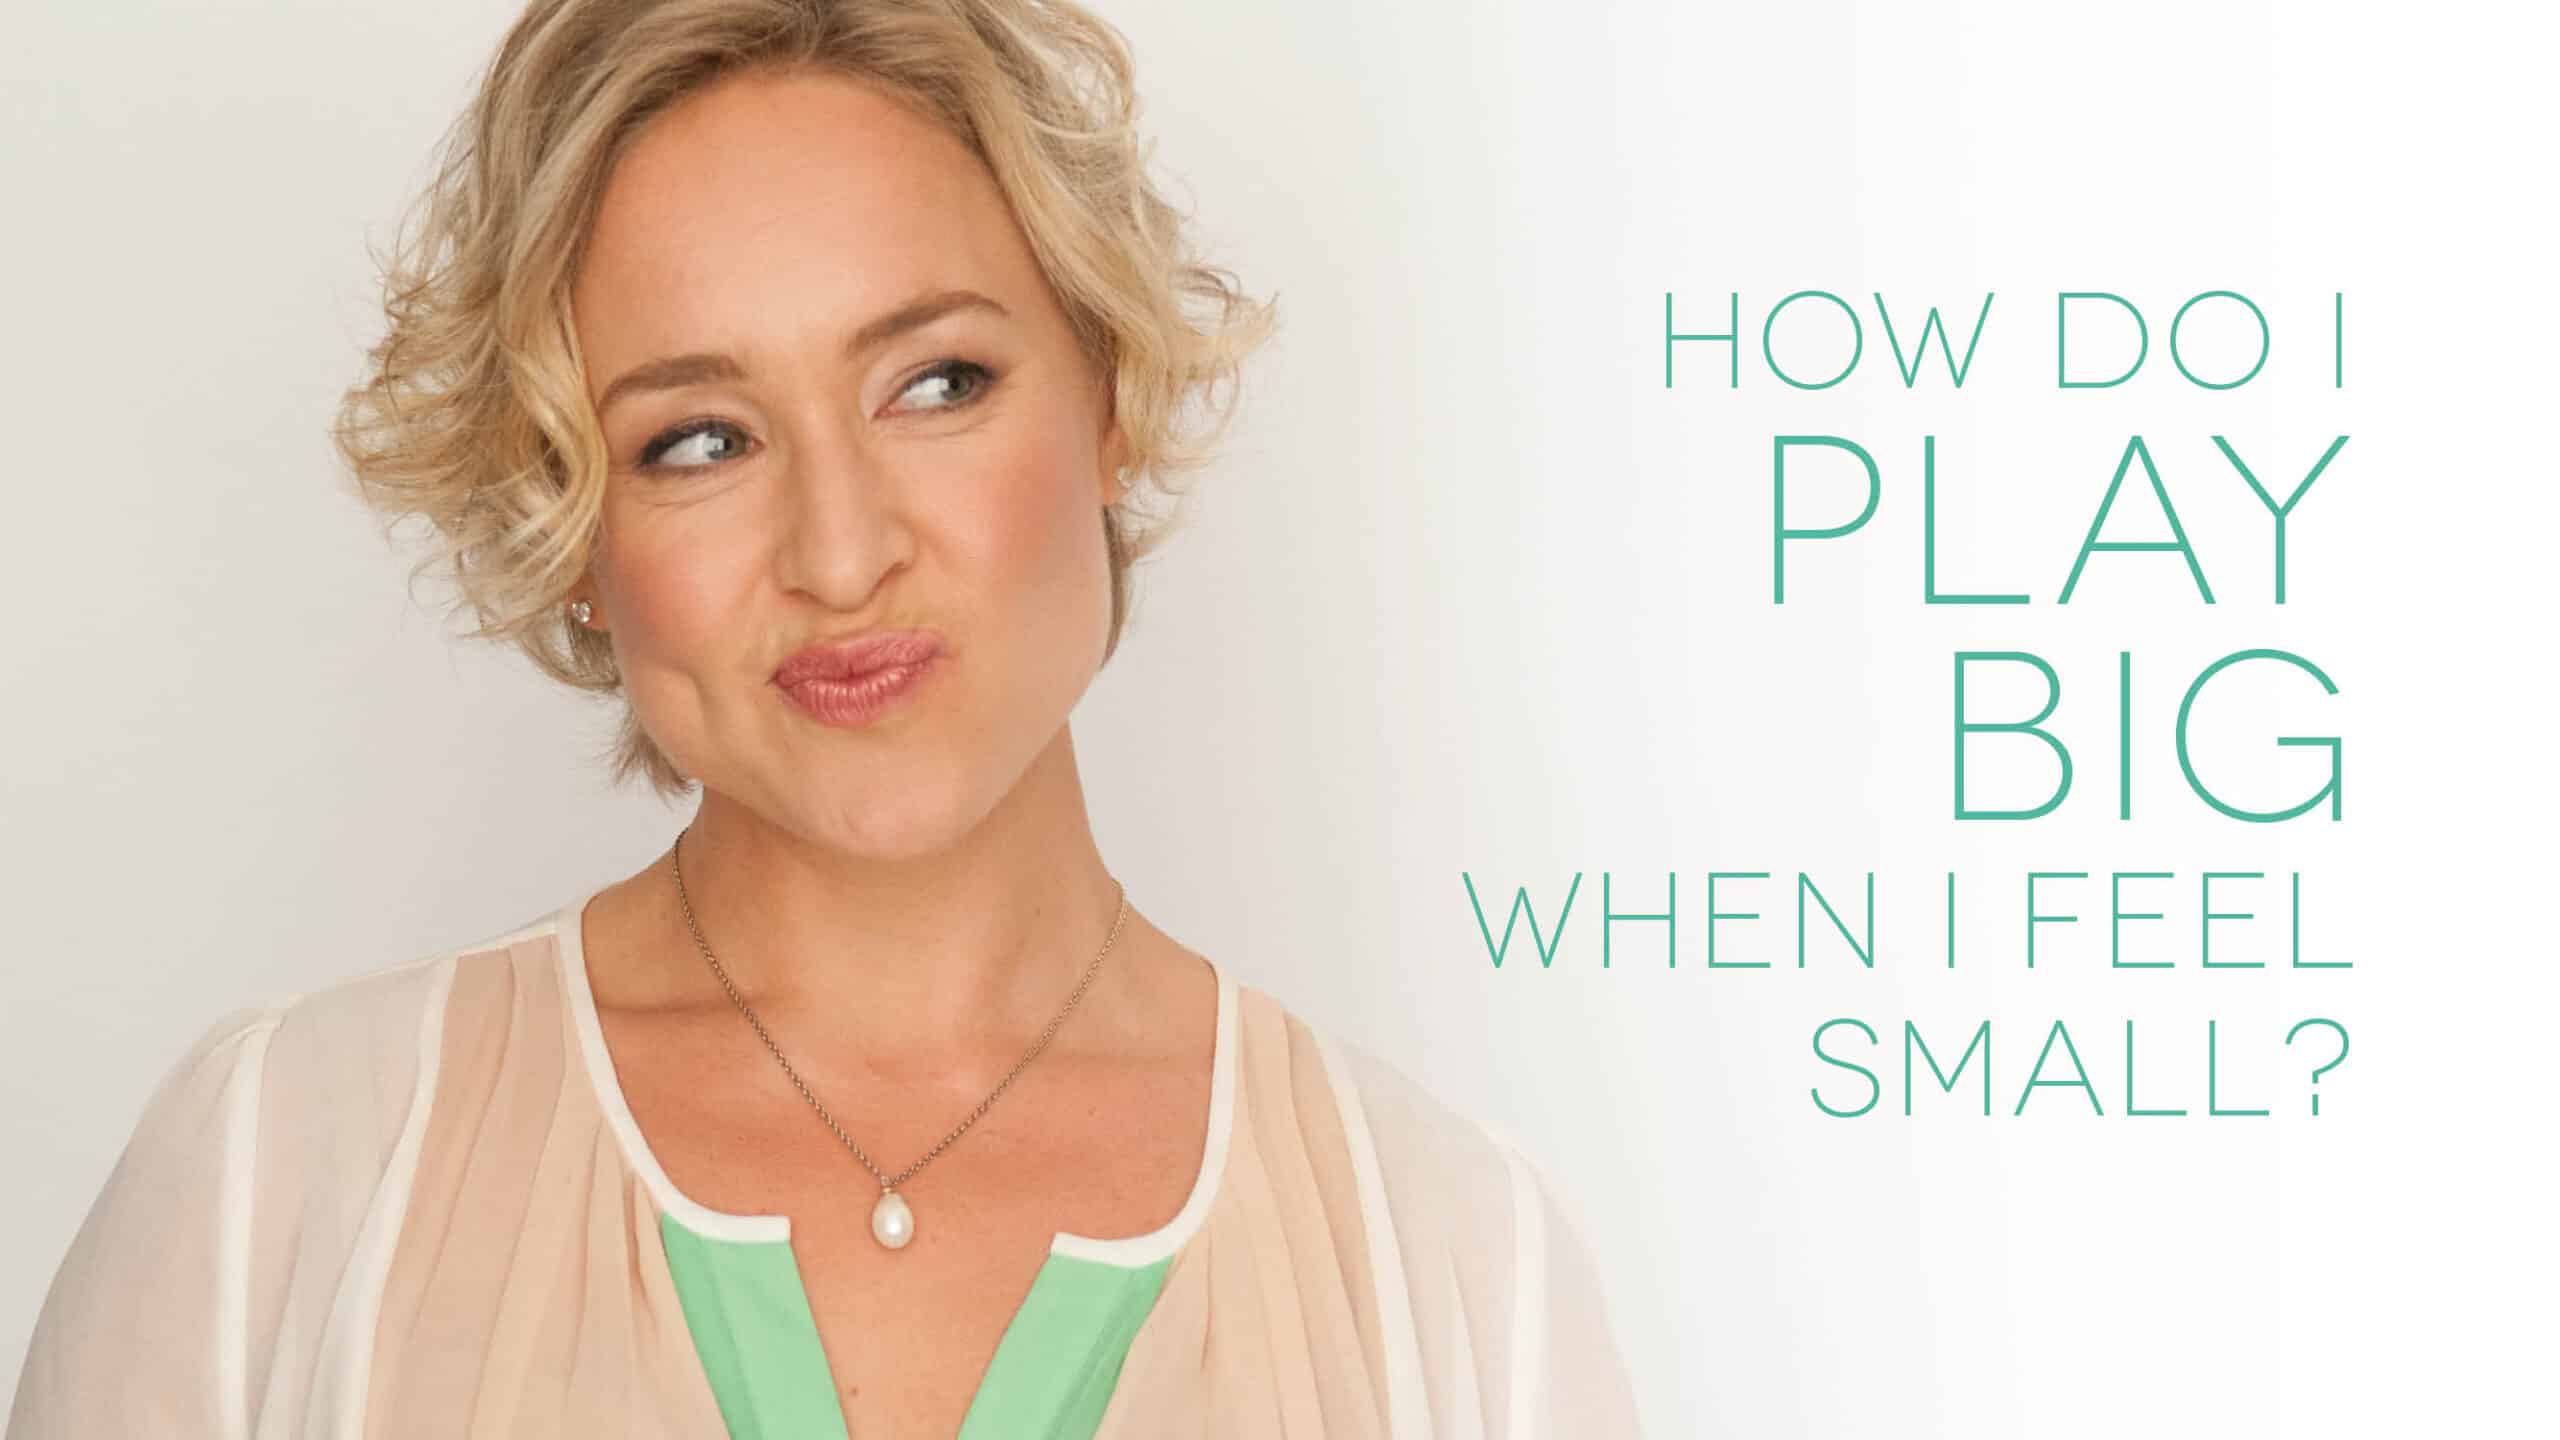 Kate Northrup explains how she plays big when she feels small. Check more out here: http://bit.ly/1px66cw